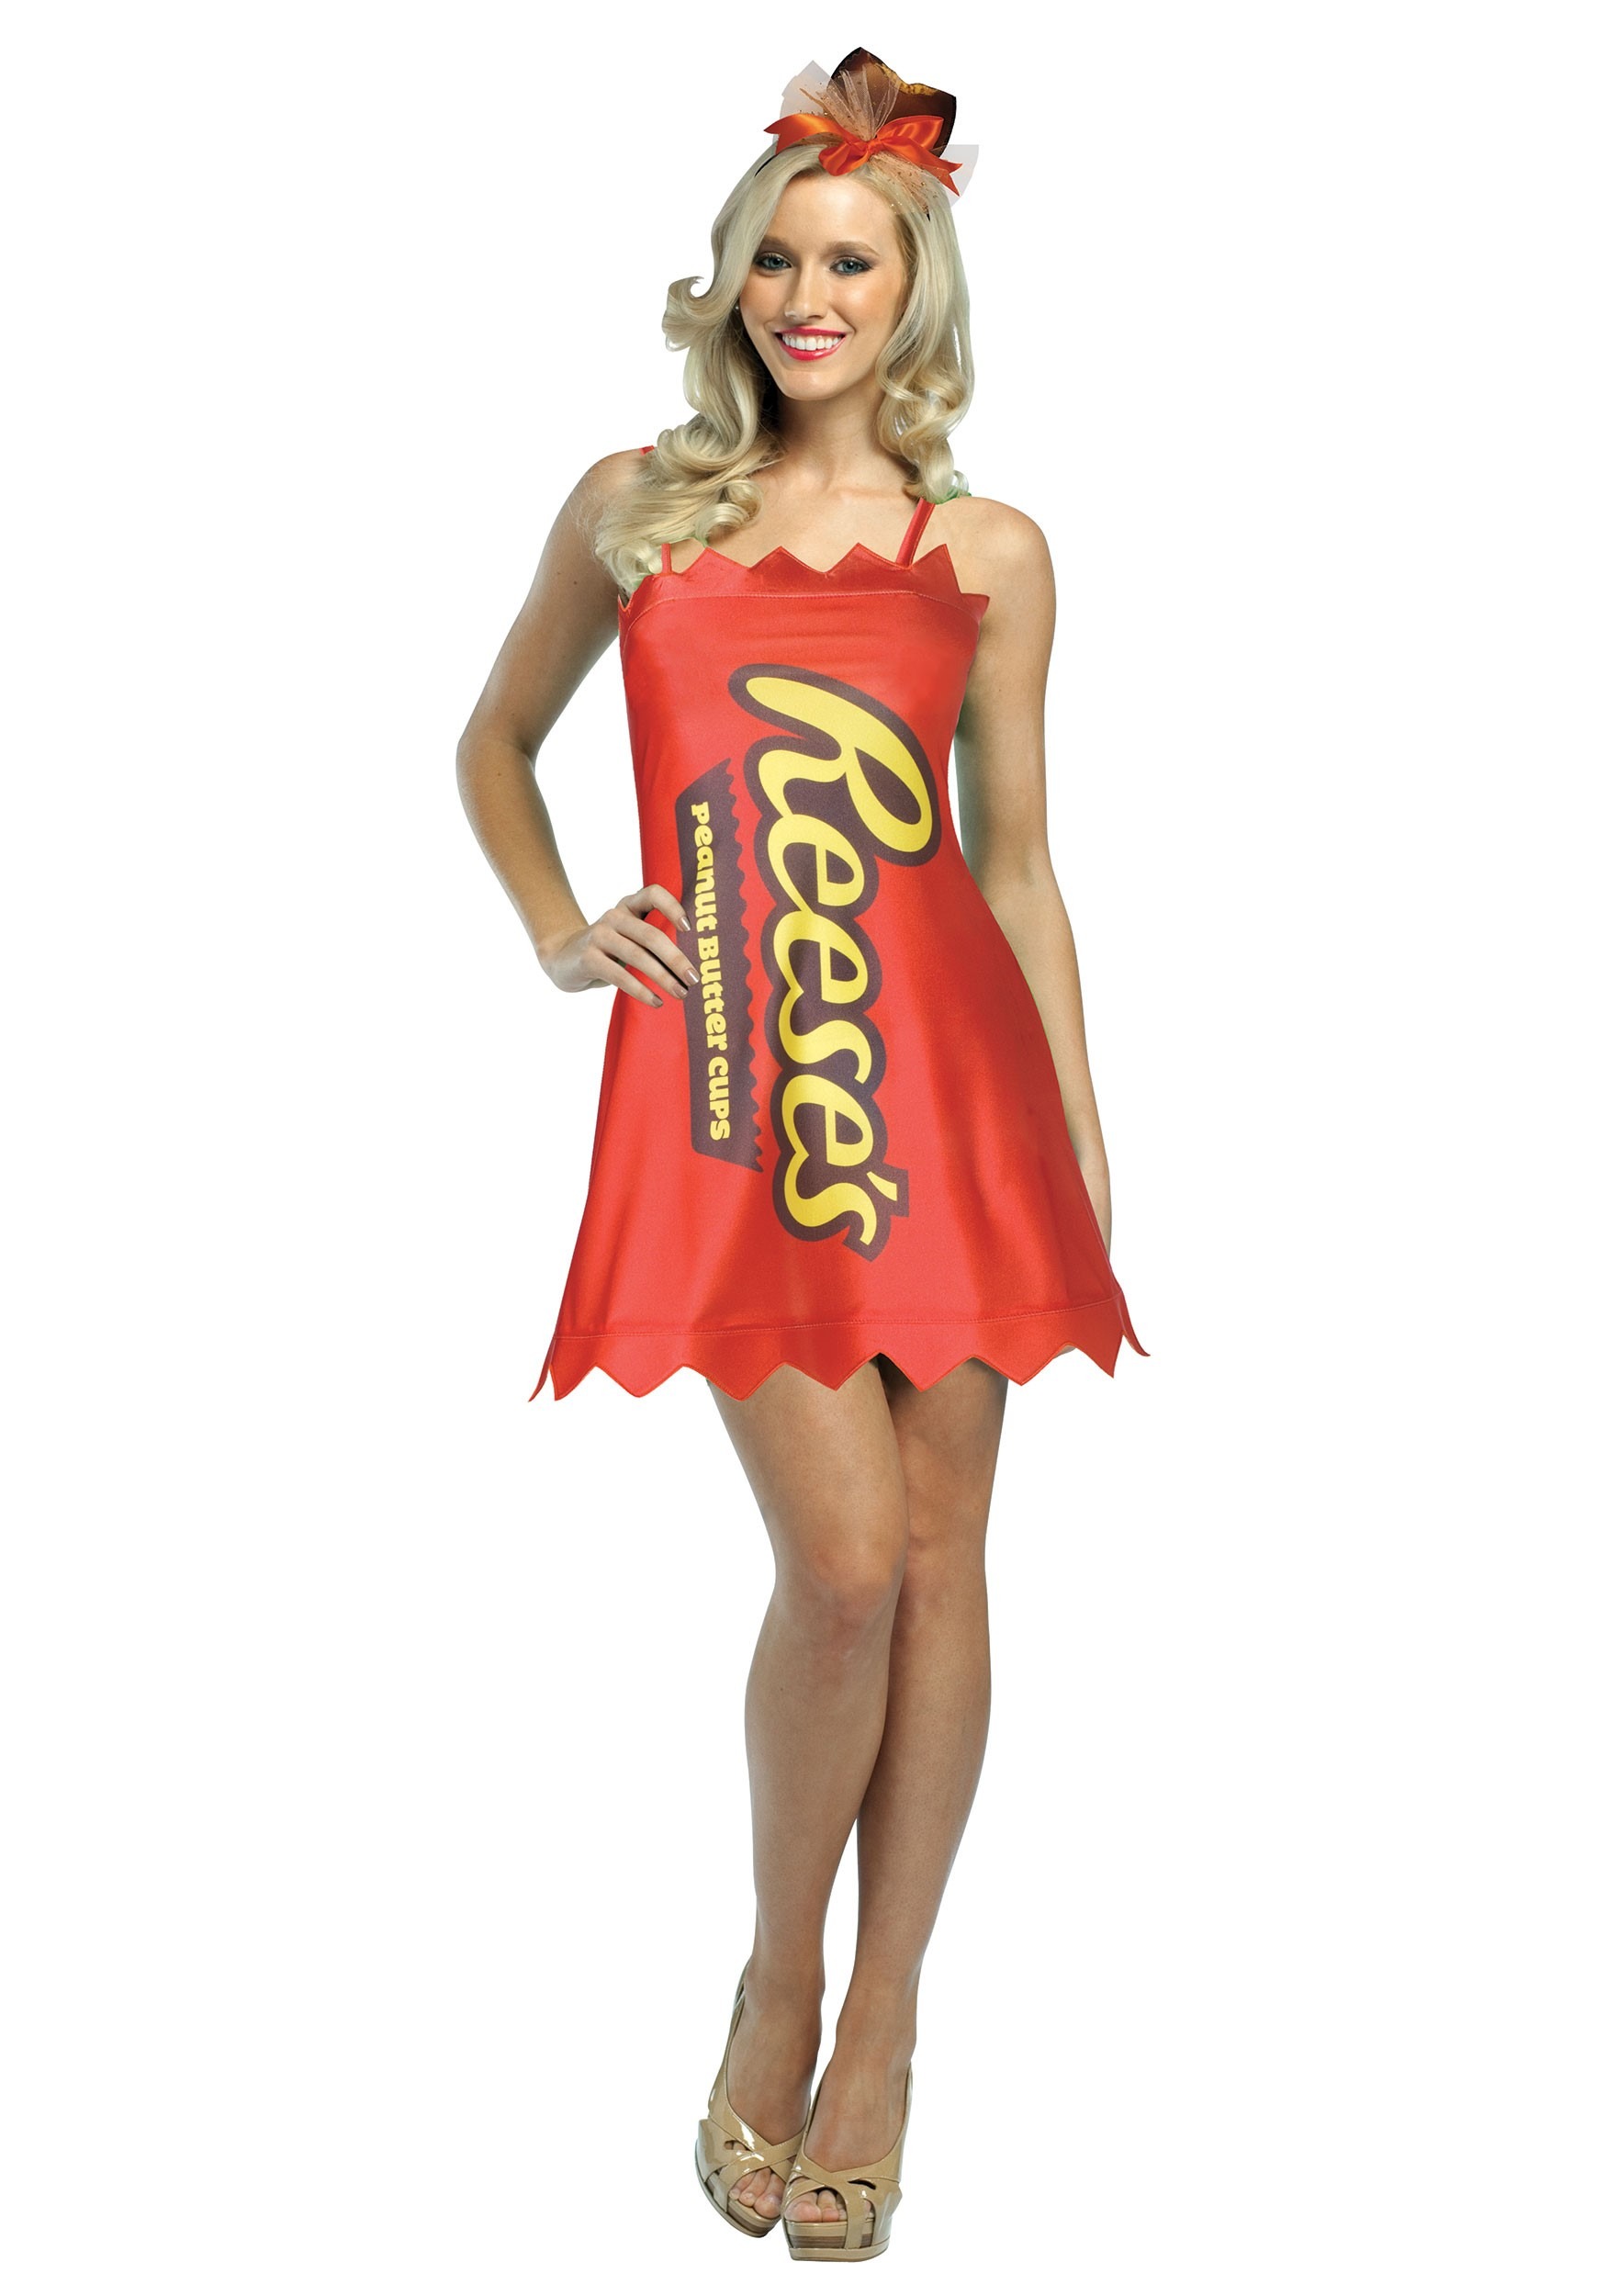 Photos - Fancy Dress Morris Costumes Reese's Women's Reese's Cup Costume Yellow/Orange MO35 